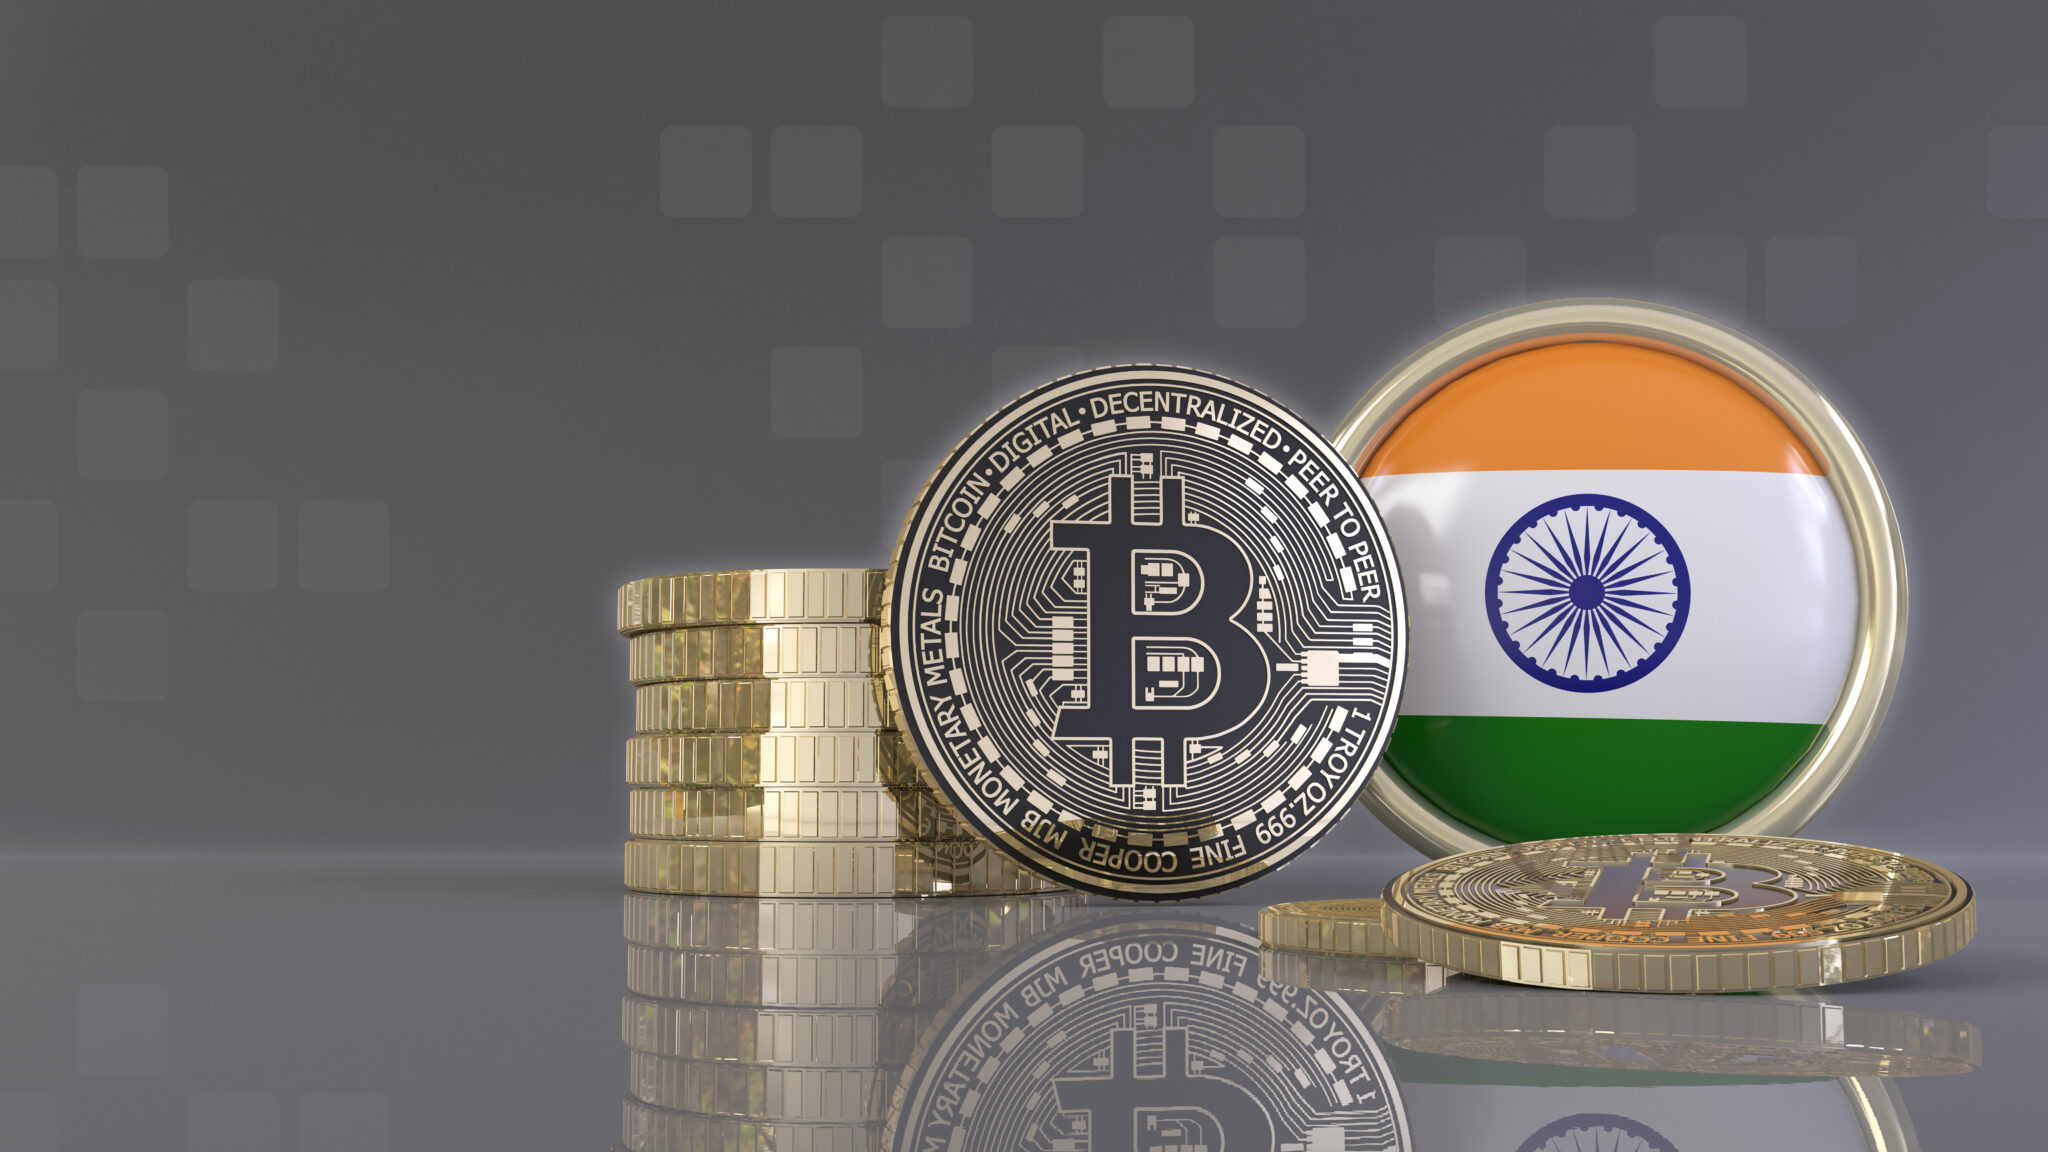 3d rendering of some metallic Bitcoins in front of an badge with the Indian flag